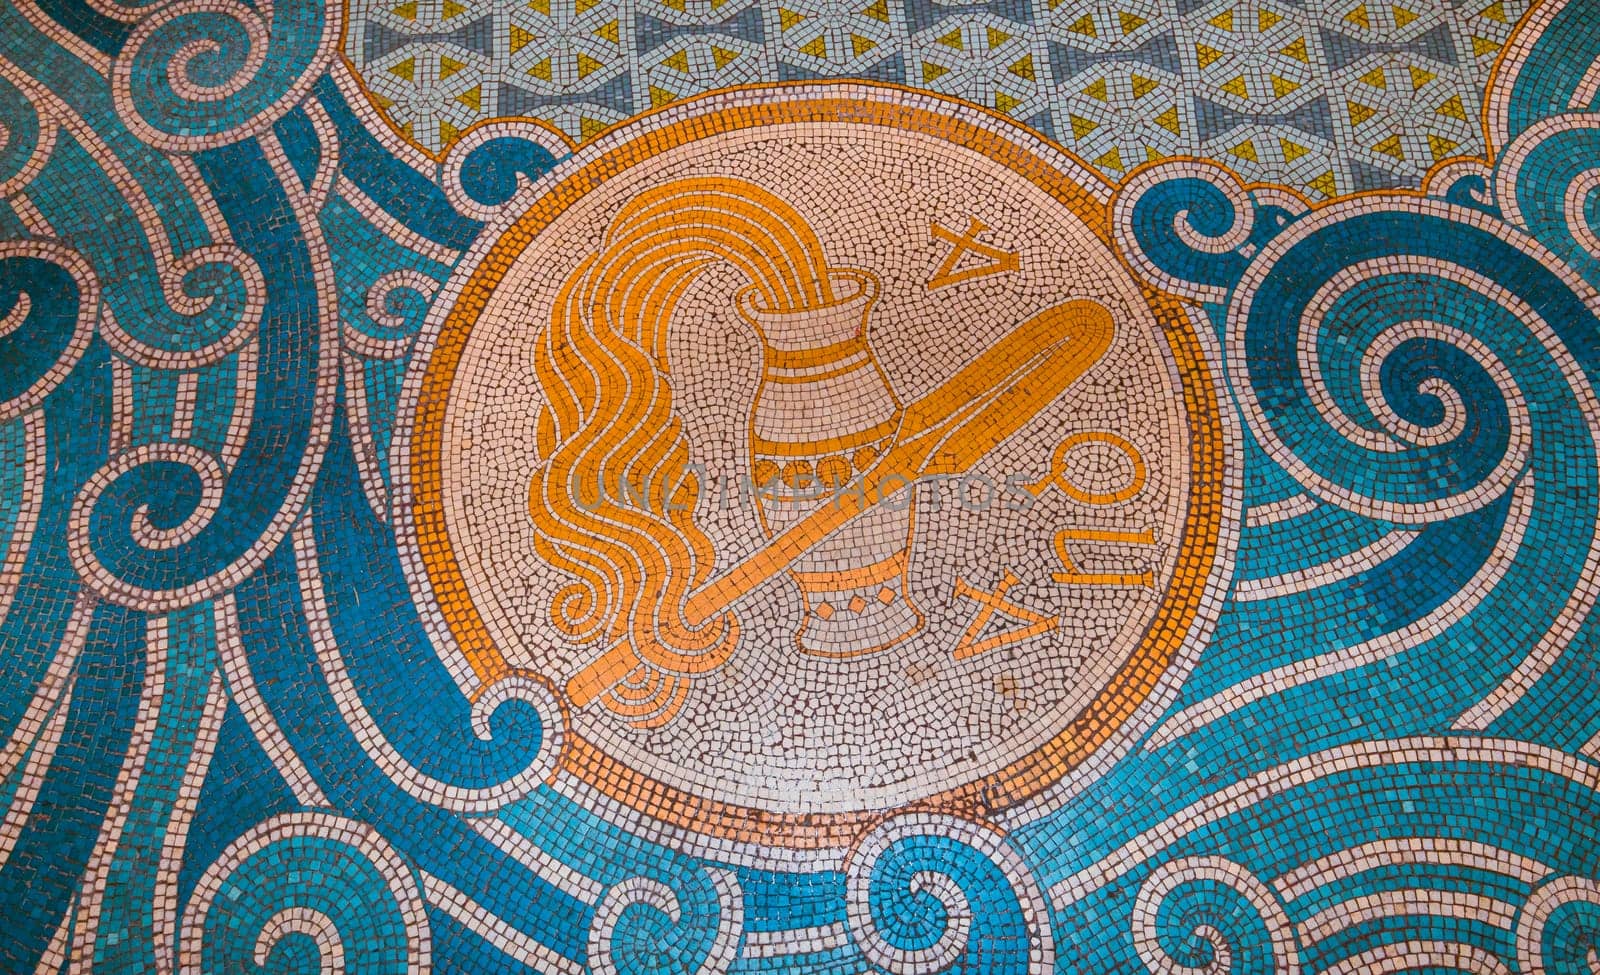 BRIARE, LOIRET, FRANCE, MAY 06, 2022 : pavement mosaic details on ground floor of Saint Etienne church